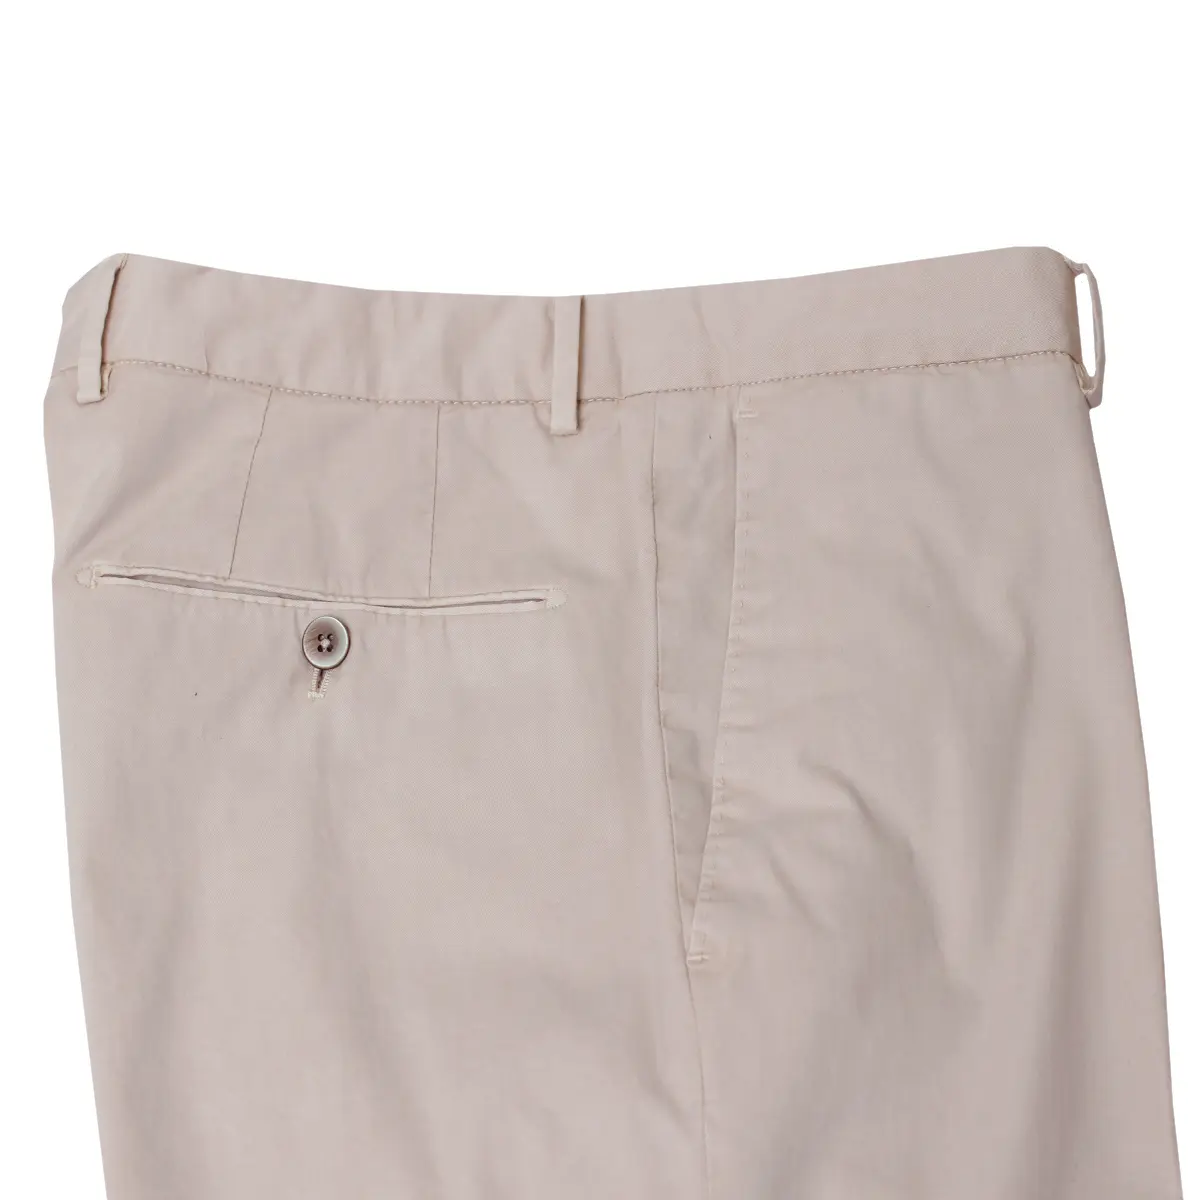 Pearl Cotton Stretch Slim Fit Chinos  Robert Old   